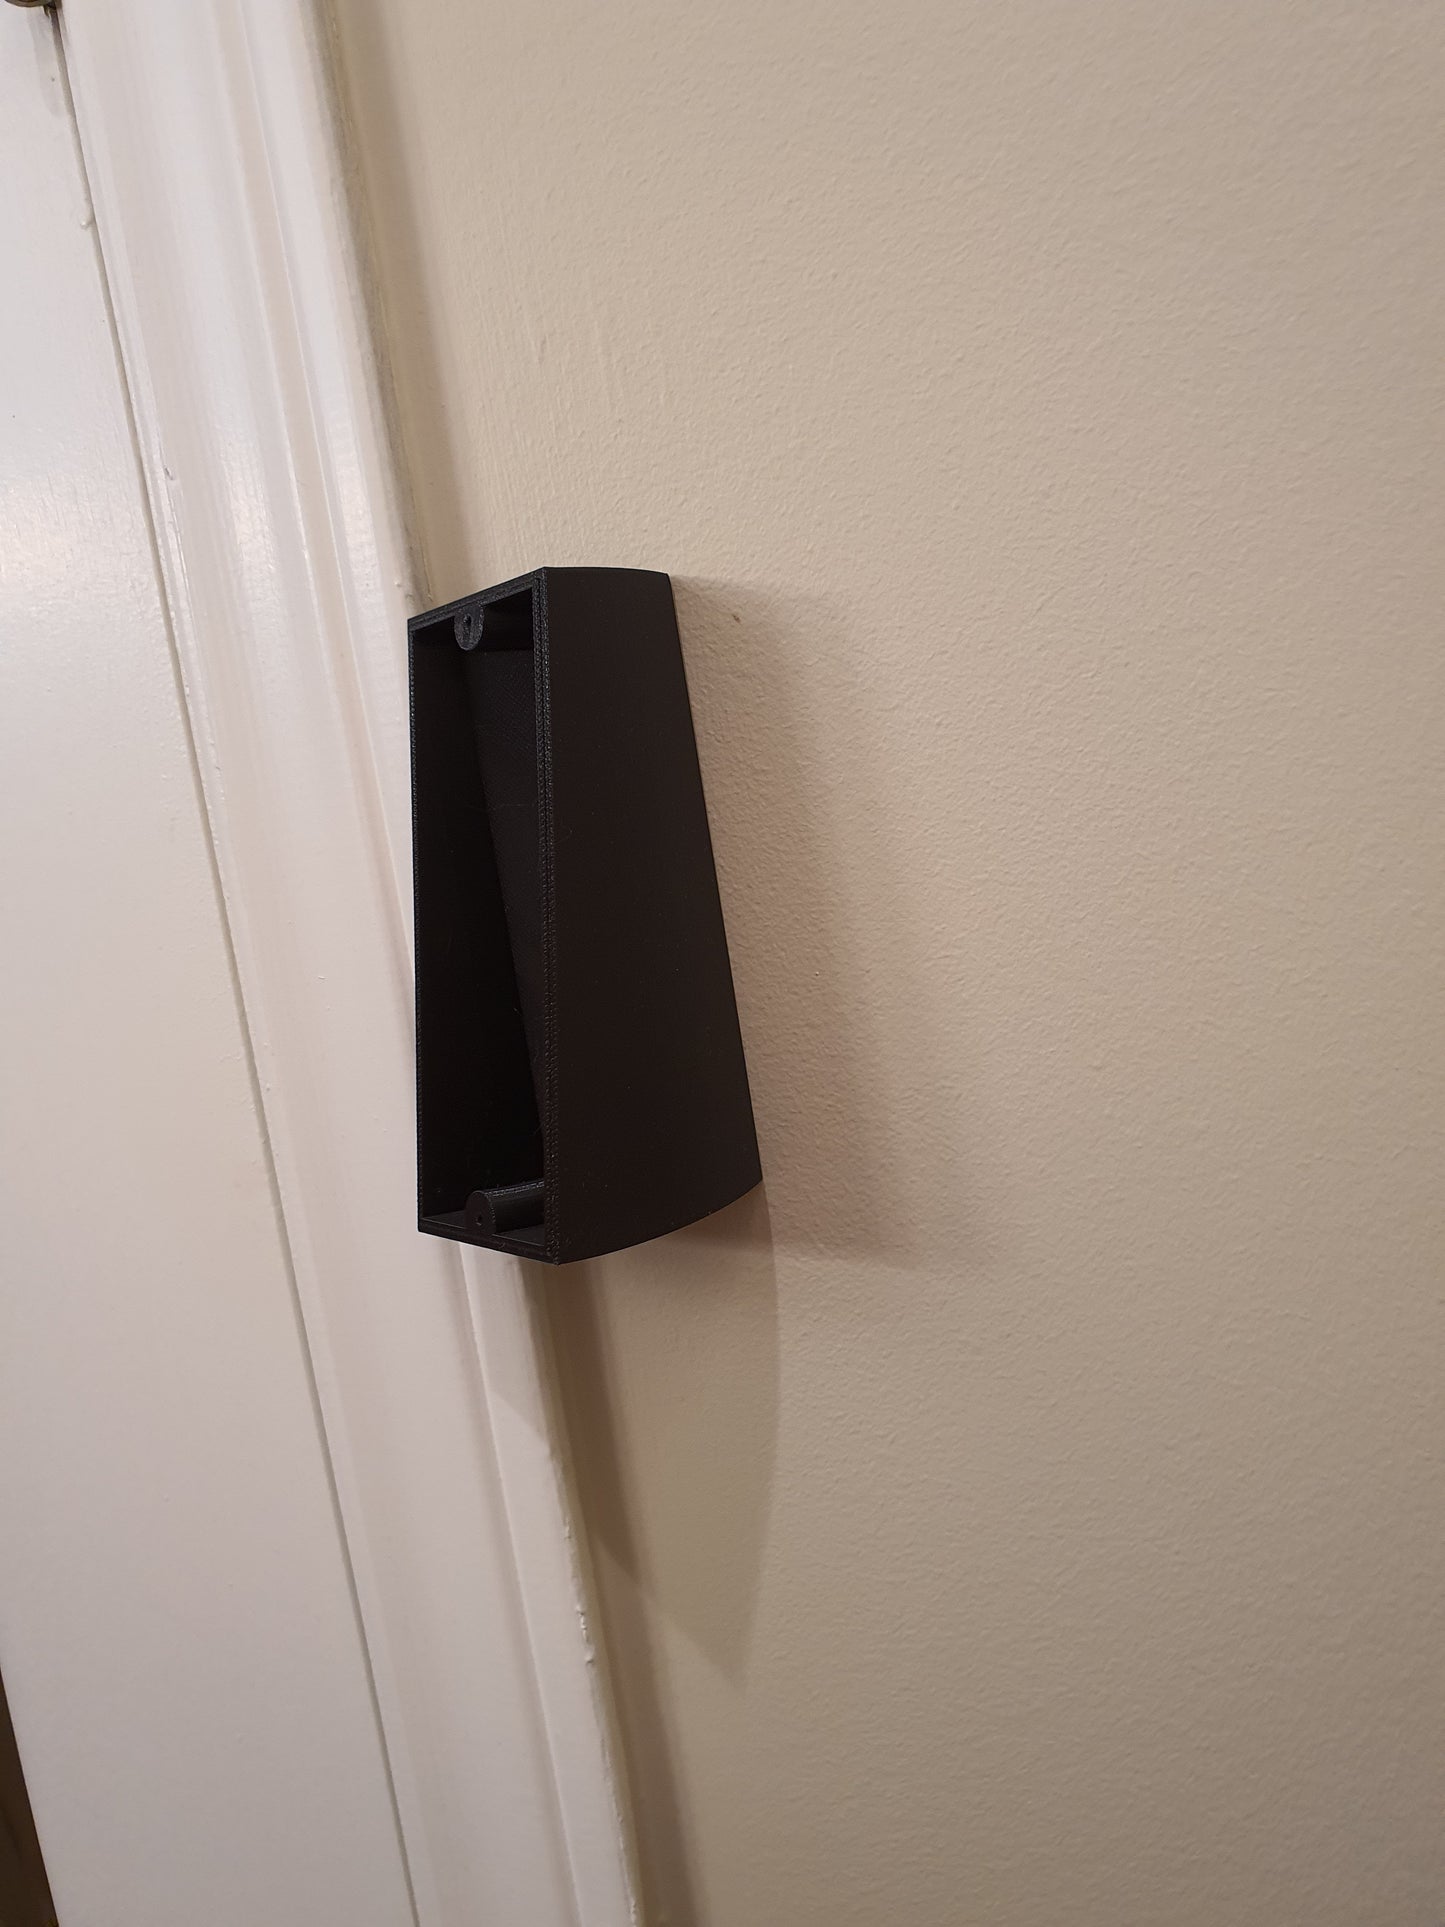 Perfect Ring Doorbell Mount. Aim Up Down Left And Right. The Ultimate Ring Doorbell Mount